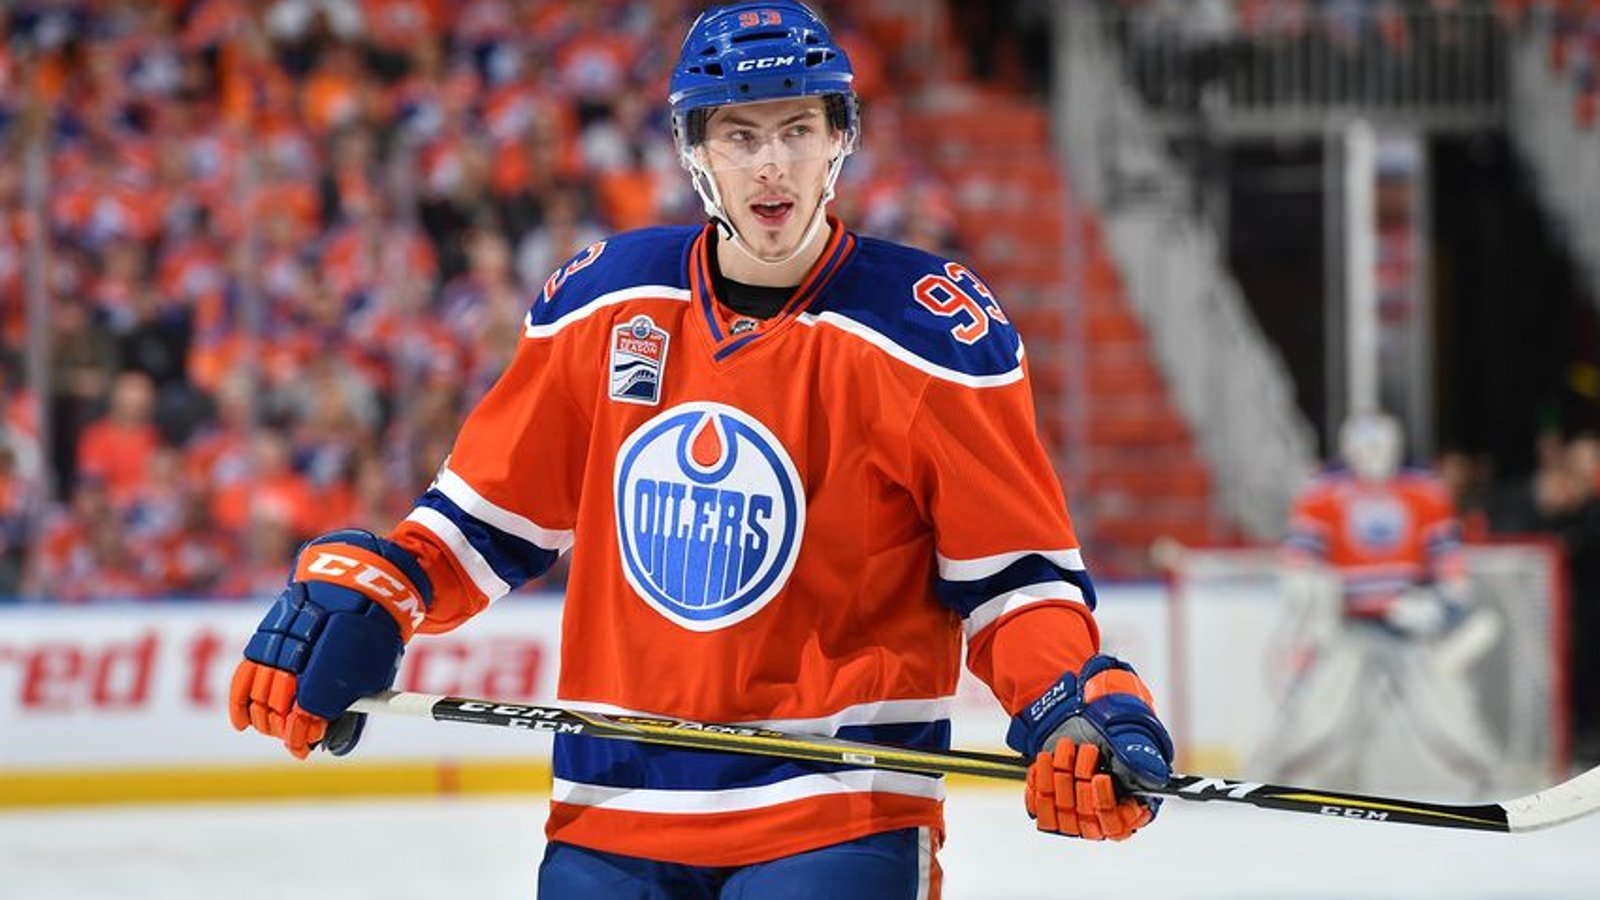 Oilers' Chiarelli had odd discussion about trading Nugent-Hopkins